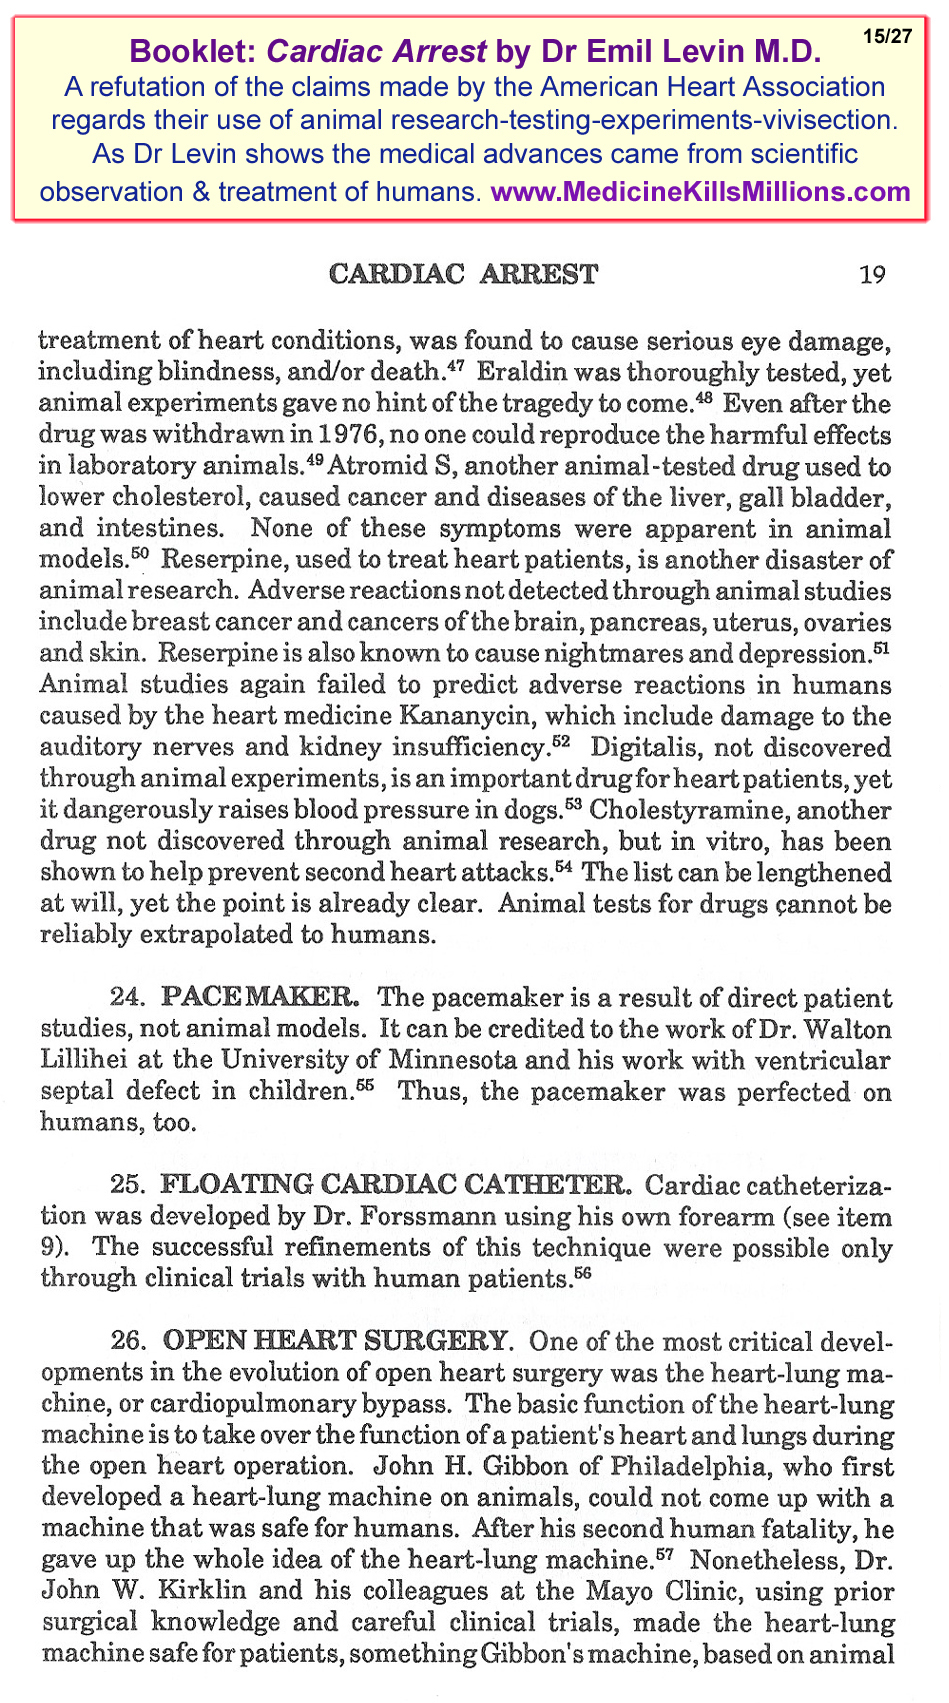 Cardiac-Arrest-15-Refutation-of-Claims-by-American-Heart-Association-About-Animal-Research-Testing-Experiments.jpg